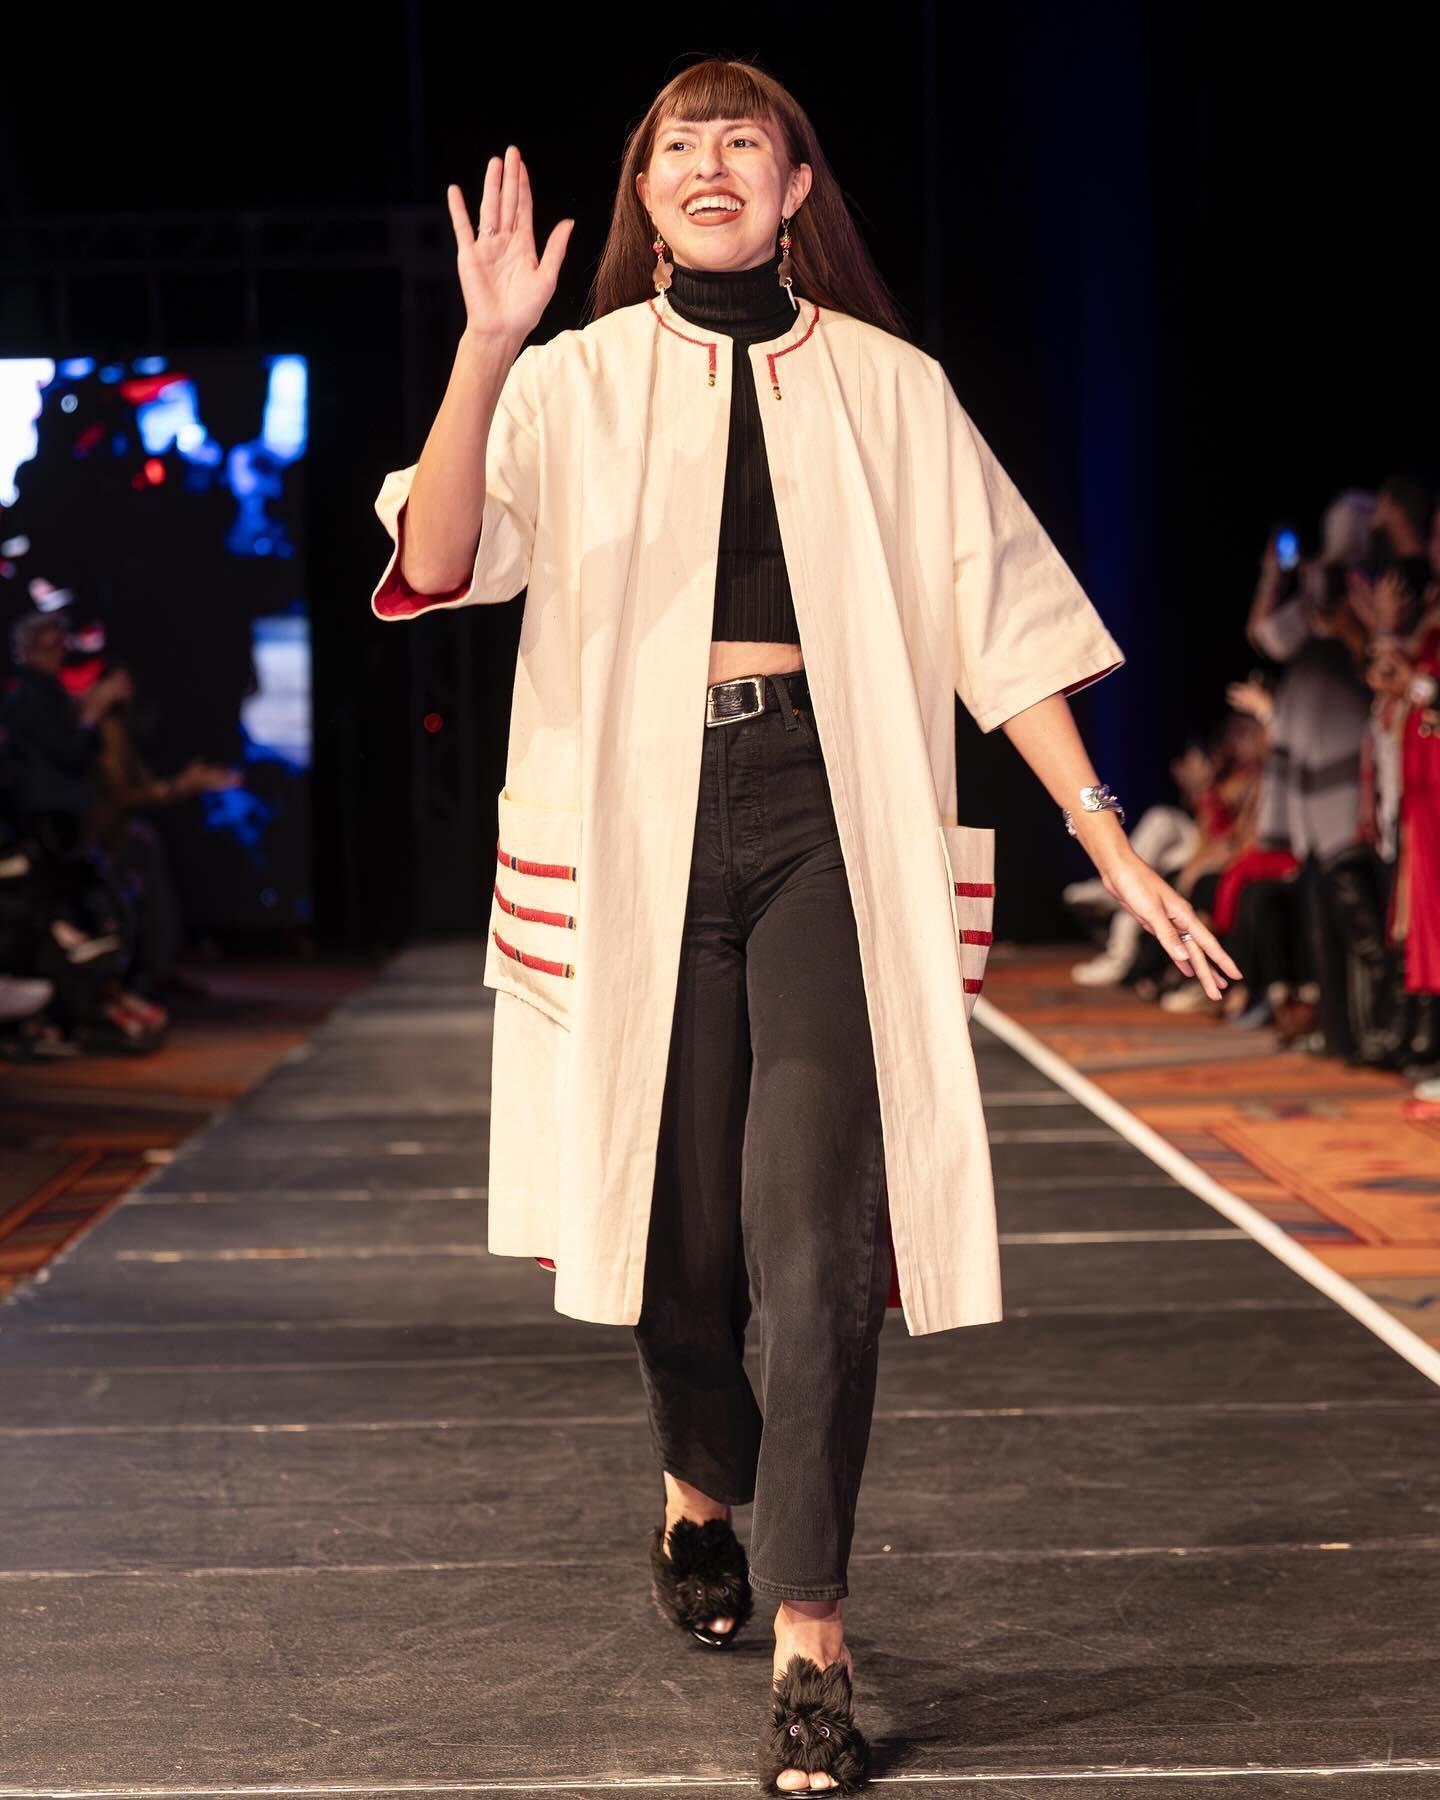 Now that I&rsquo;ve got more than 10hrs of sleep per week in my body, I can answer the question: &ldquo;How was @swaianativefashion Native Fashion Week?&rdquo;
.
I can say with every breath that this experience was unforgettable and it threw me into 